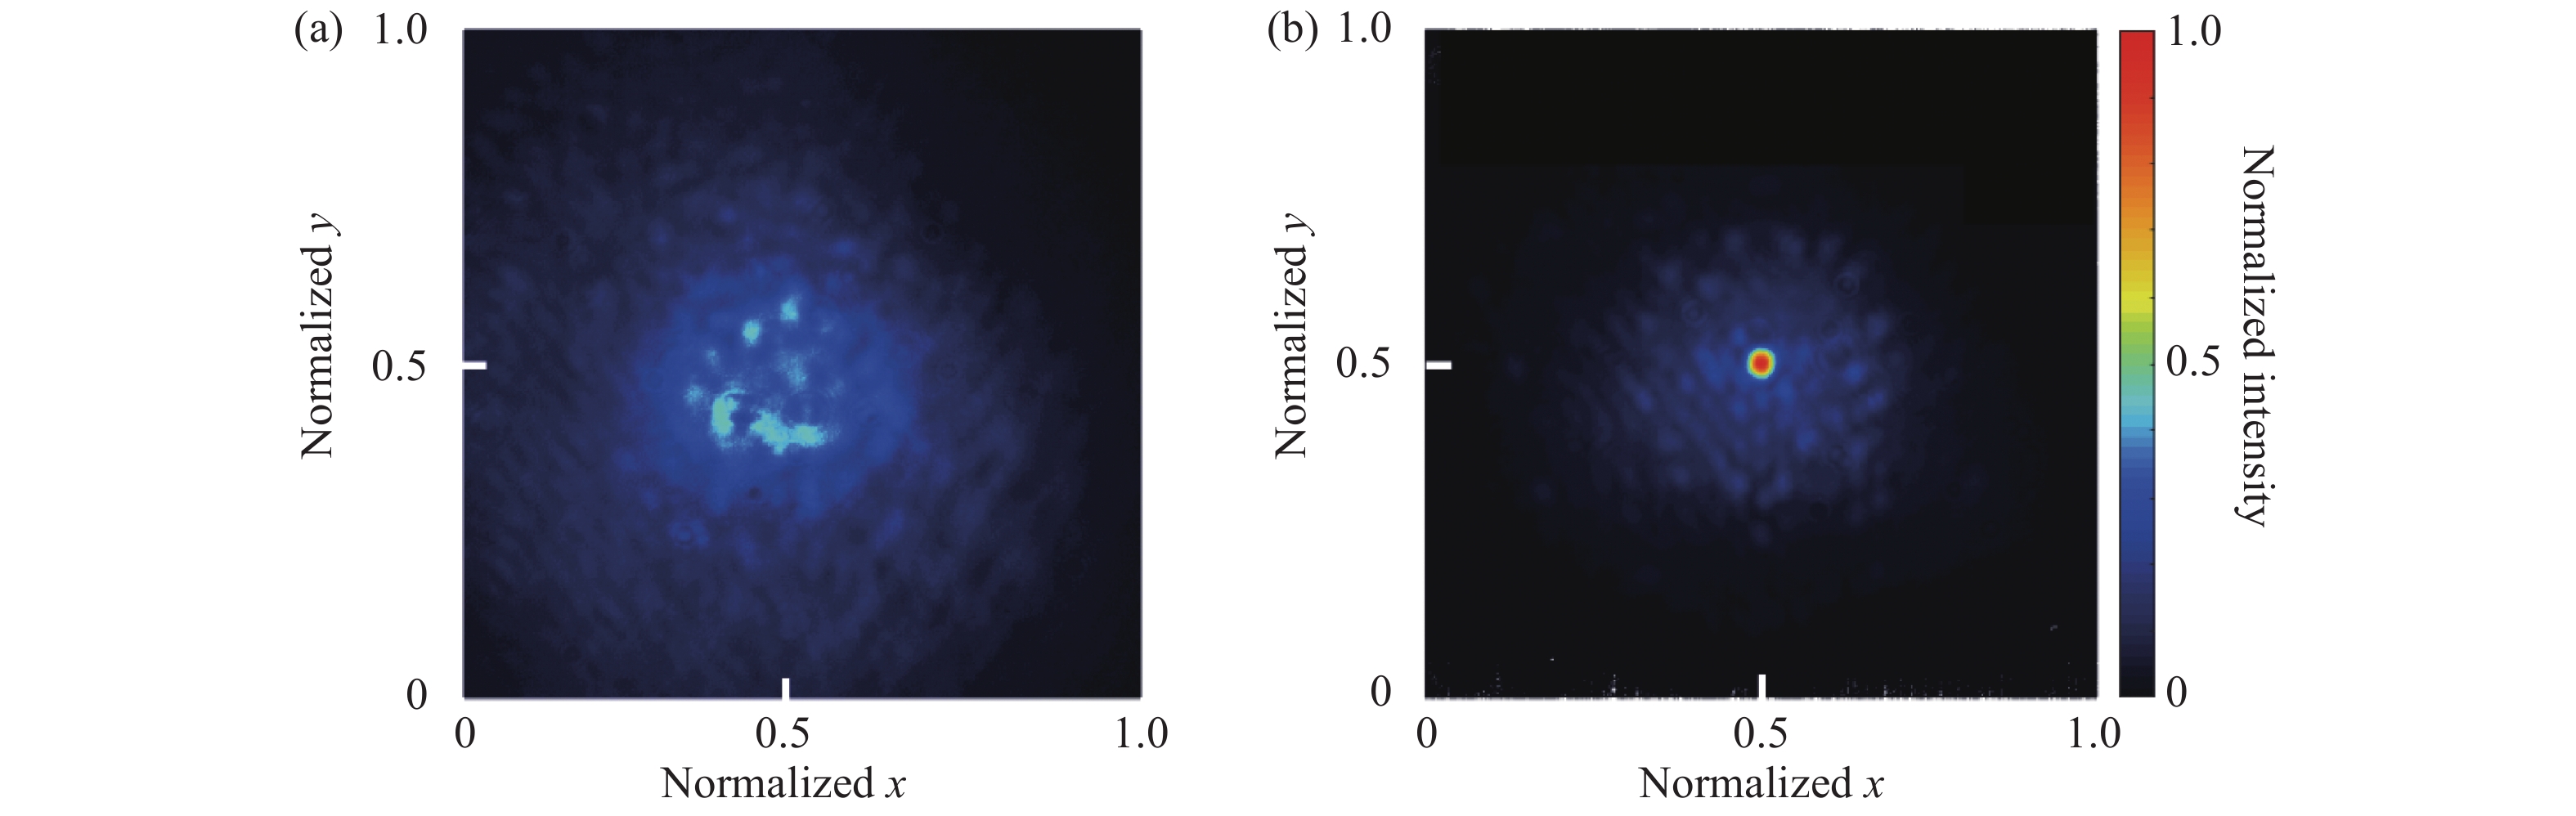 Experimental results of coherent beam combing with 20 kW level fiber laser. (a) Far-field pattern long exposure pattern in open loop; (b) Far-field pattern long exposure pattern in close loop